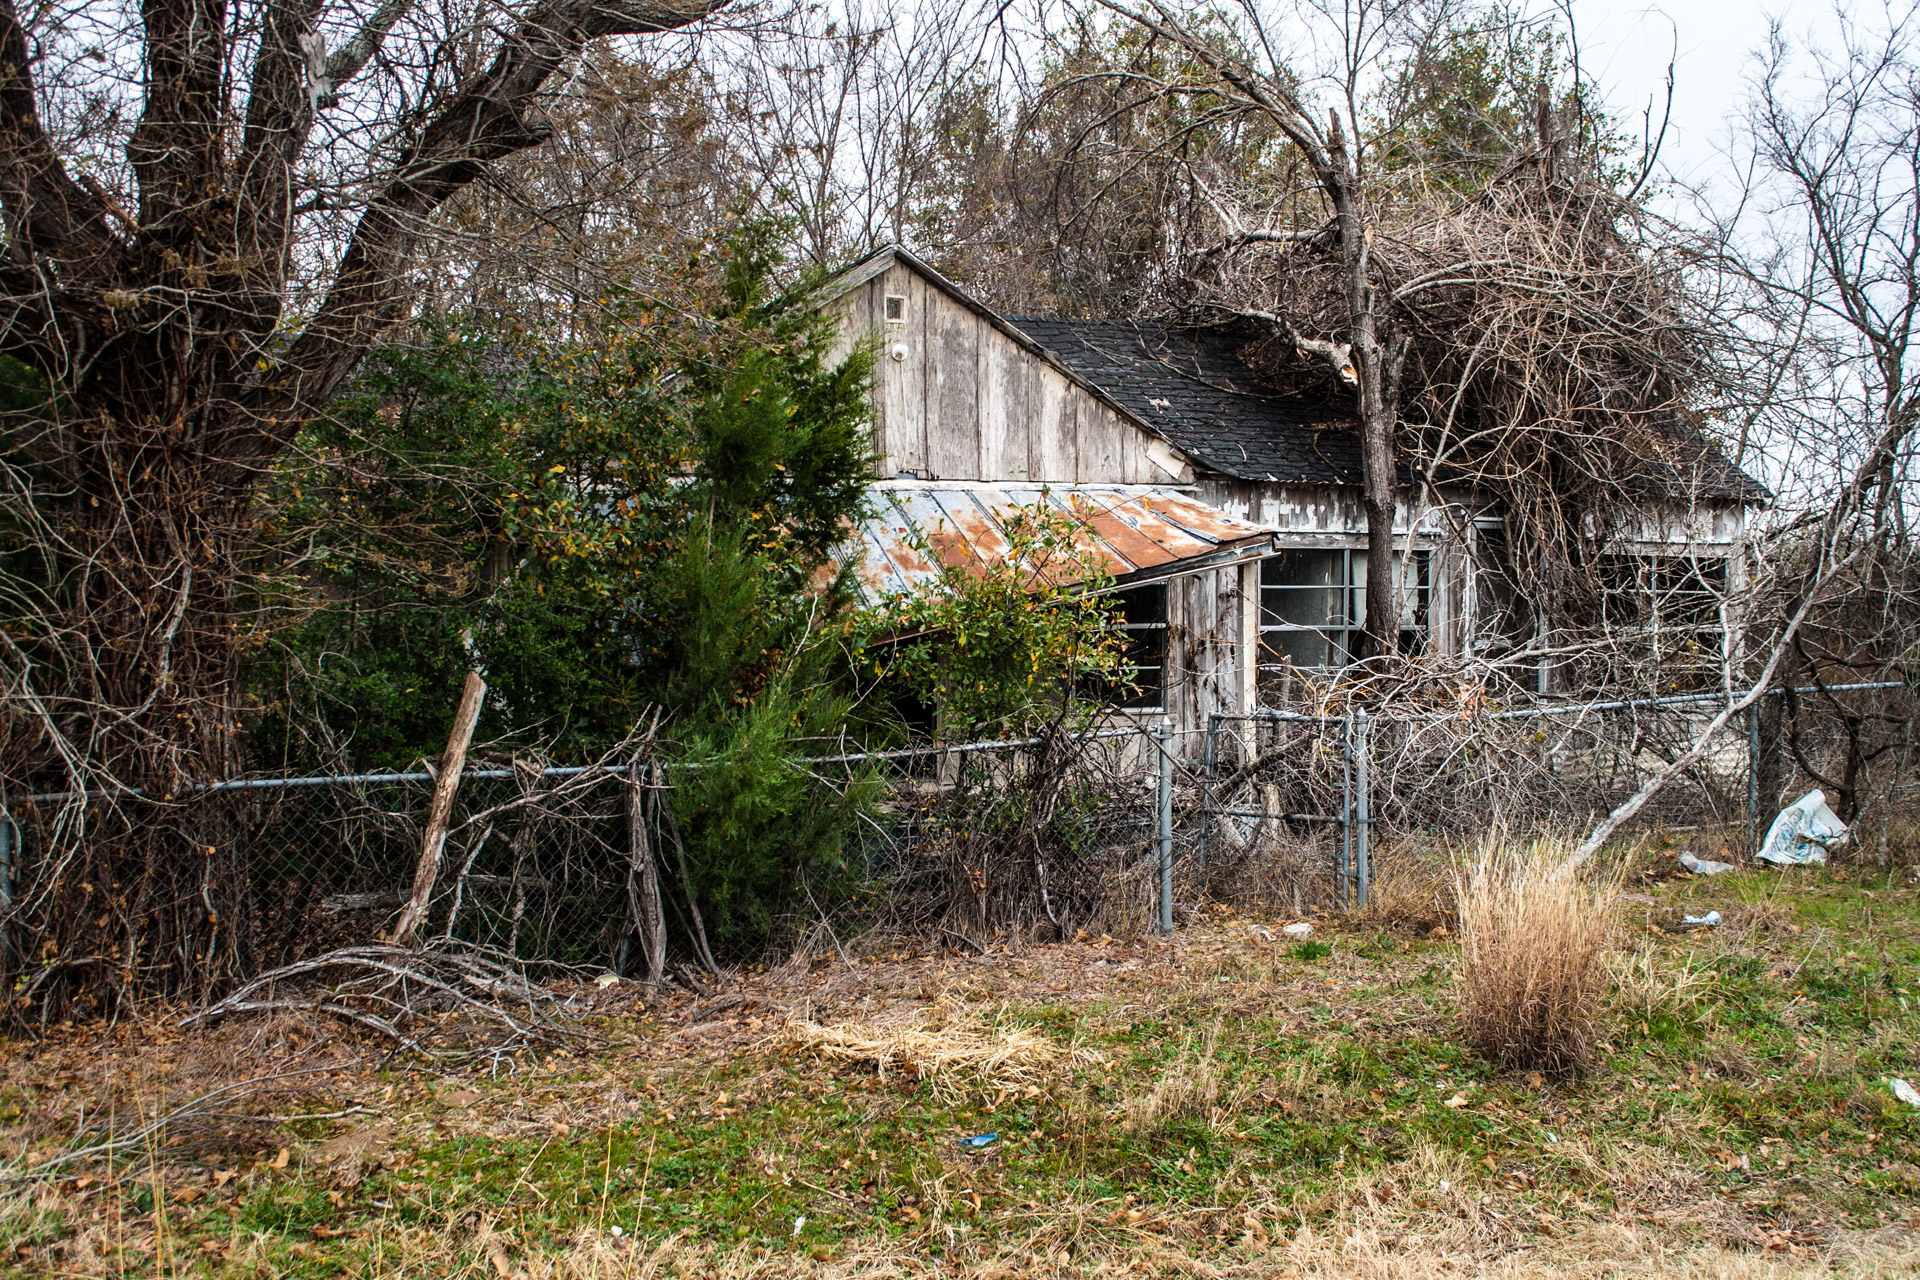 Reagan, Texas - A Branchy House and Truck (front mid)